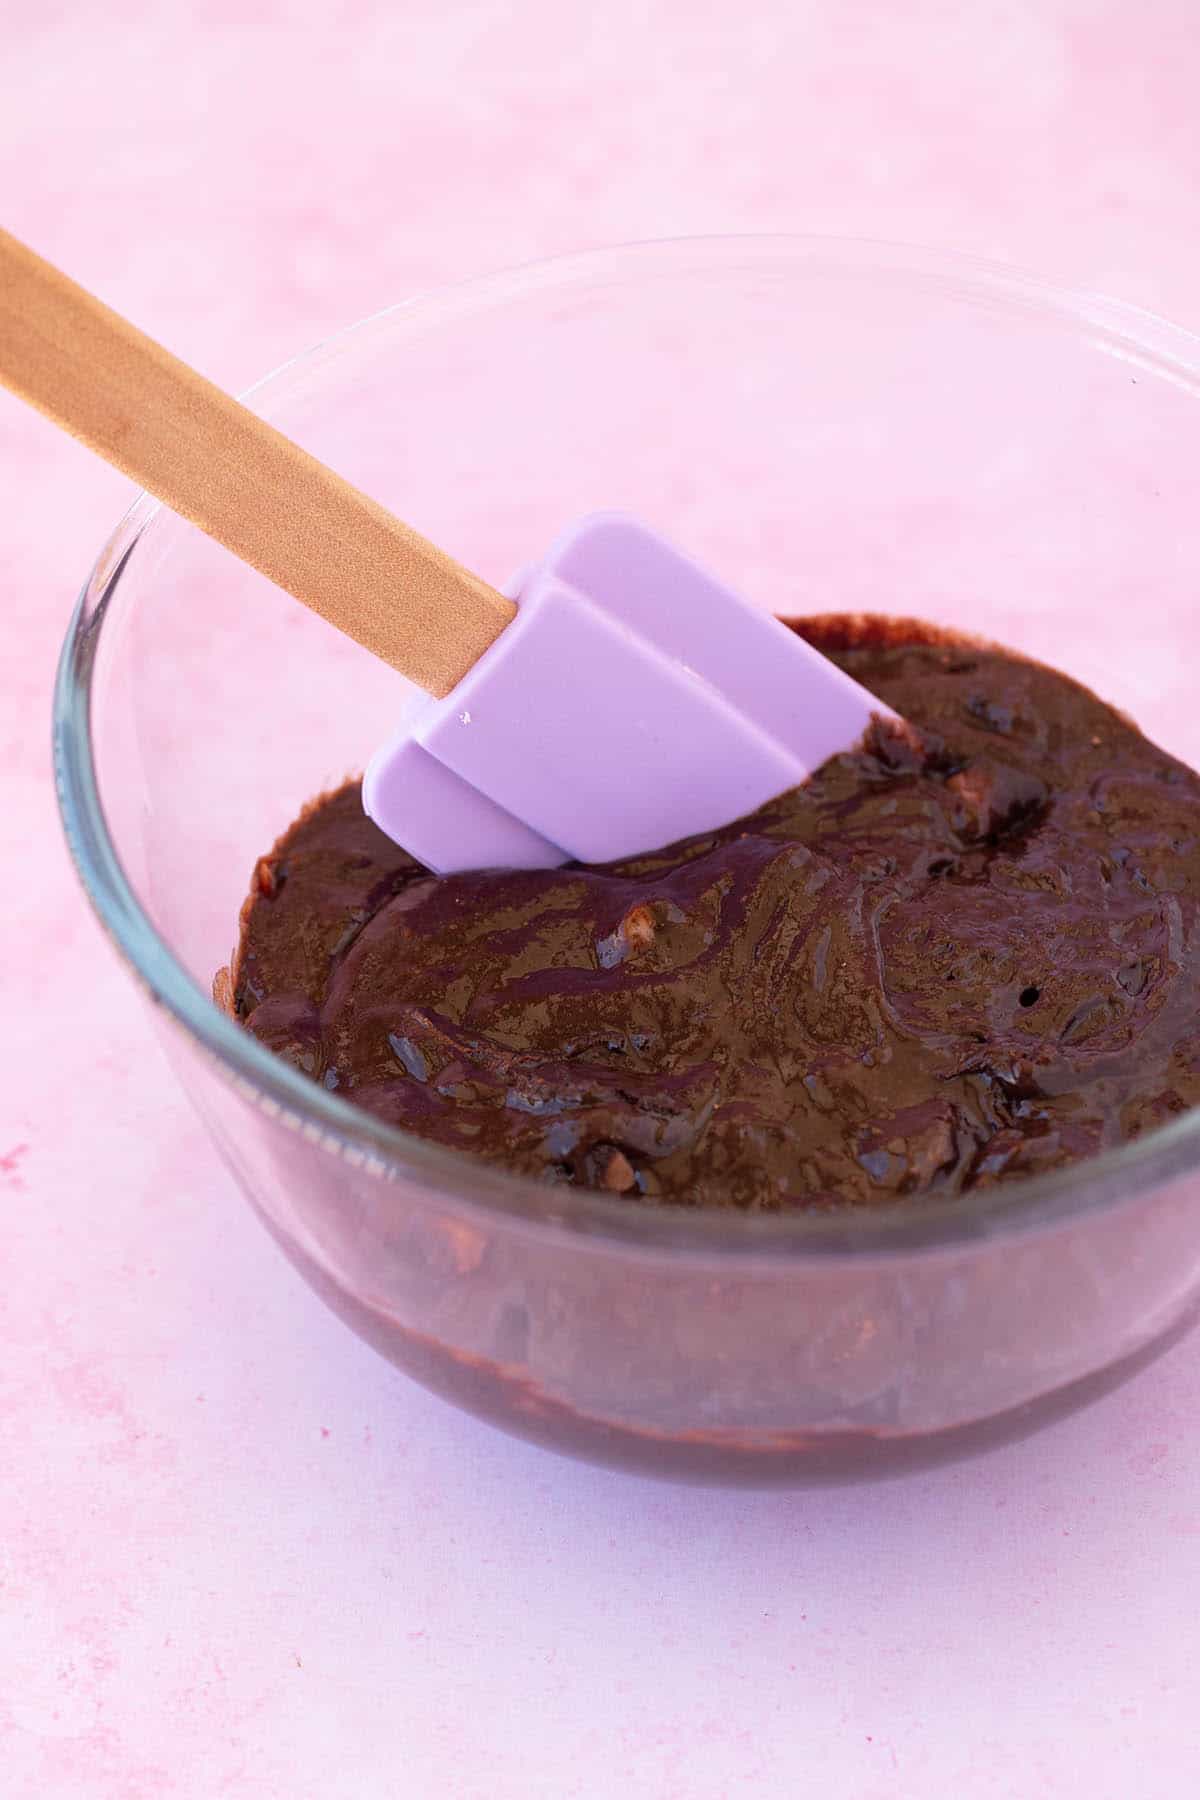 A glass mixing bowl filled with chocolate brownie batter